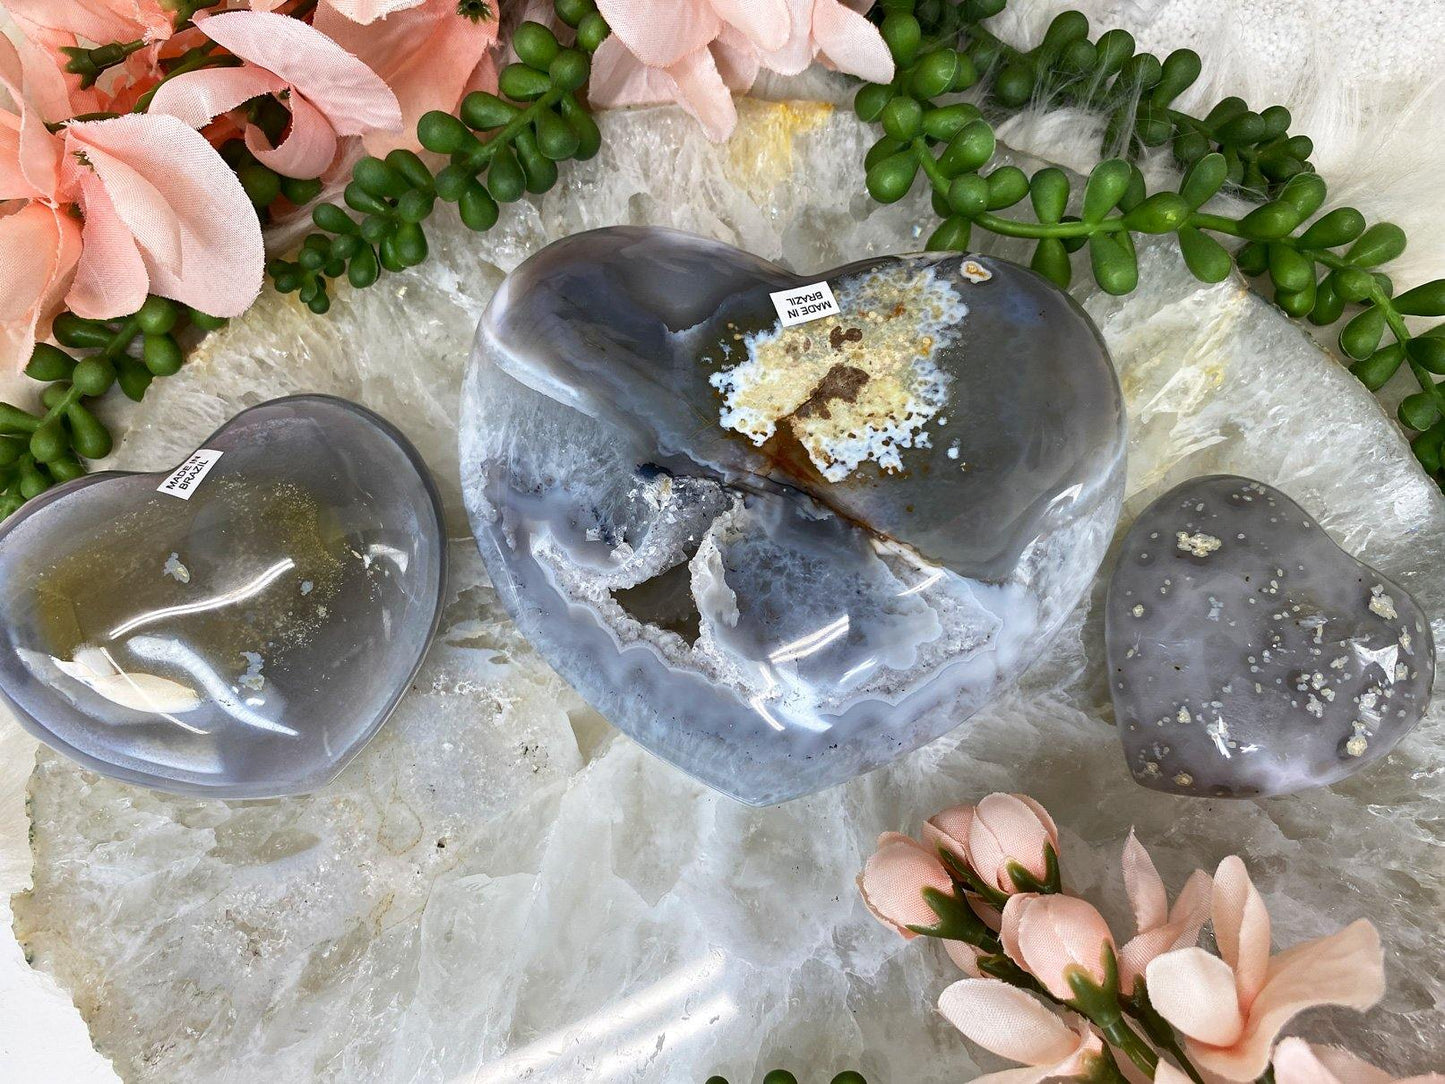 Gray-White-Chalcedony-Quartz-Agate-Polished-Crystal-Heart-Carving